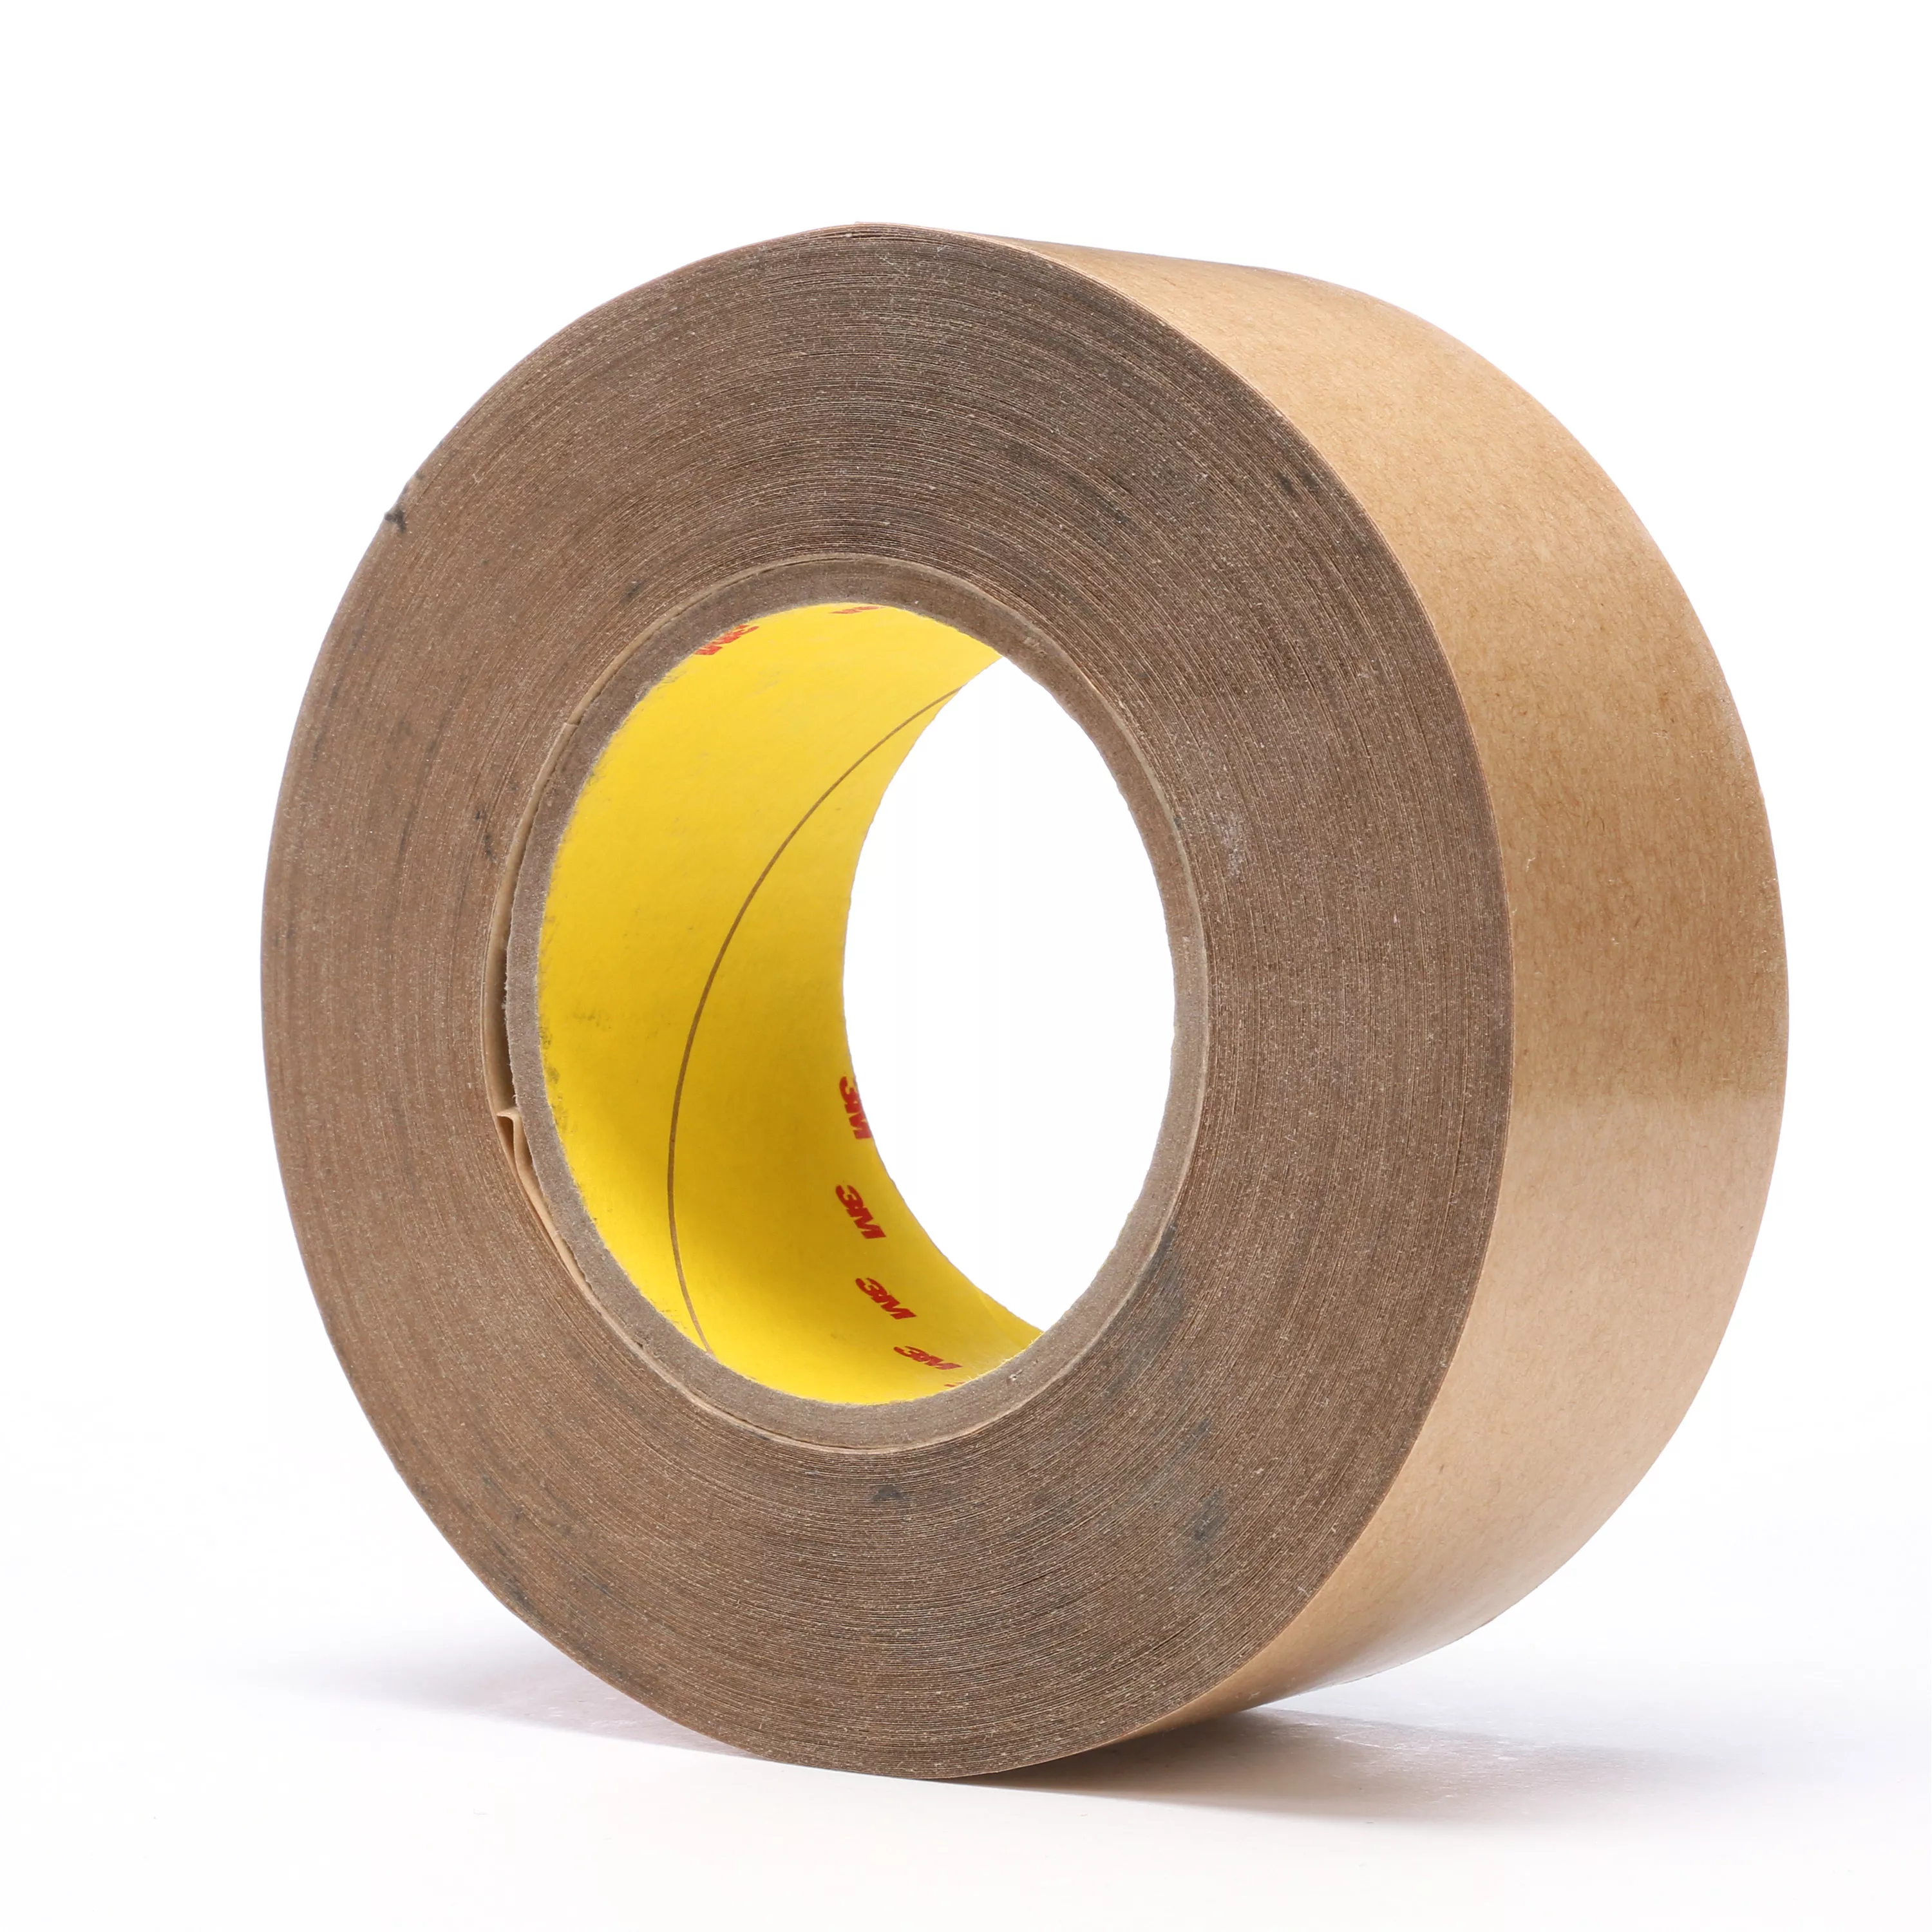 3M™ Adhesive Transfer Tape 950, Clear, 2 in x 60 yd, 5 mil, 24 Roll/Case